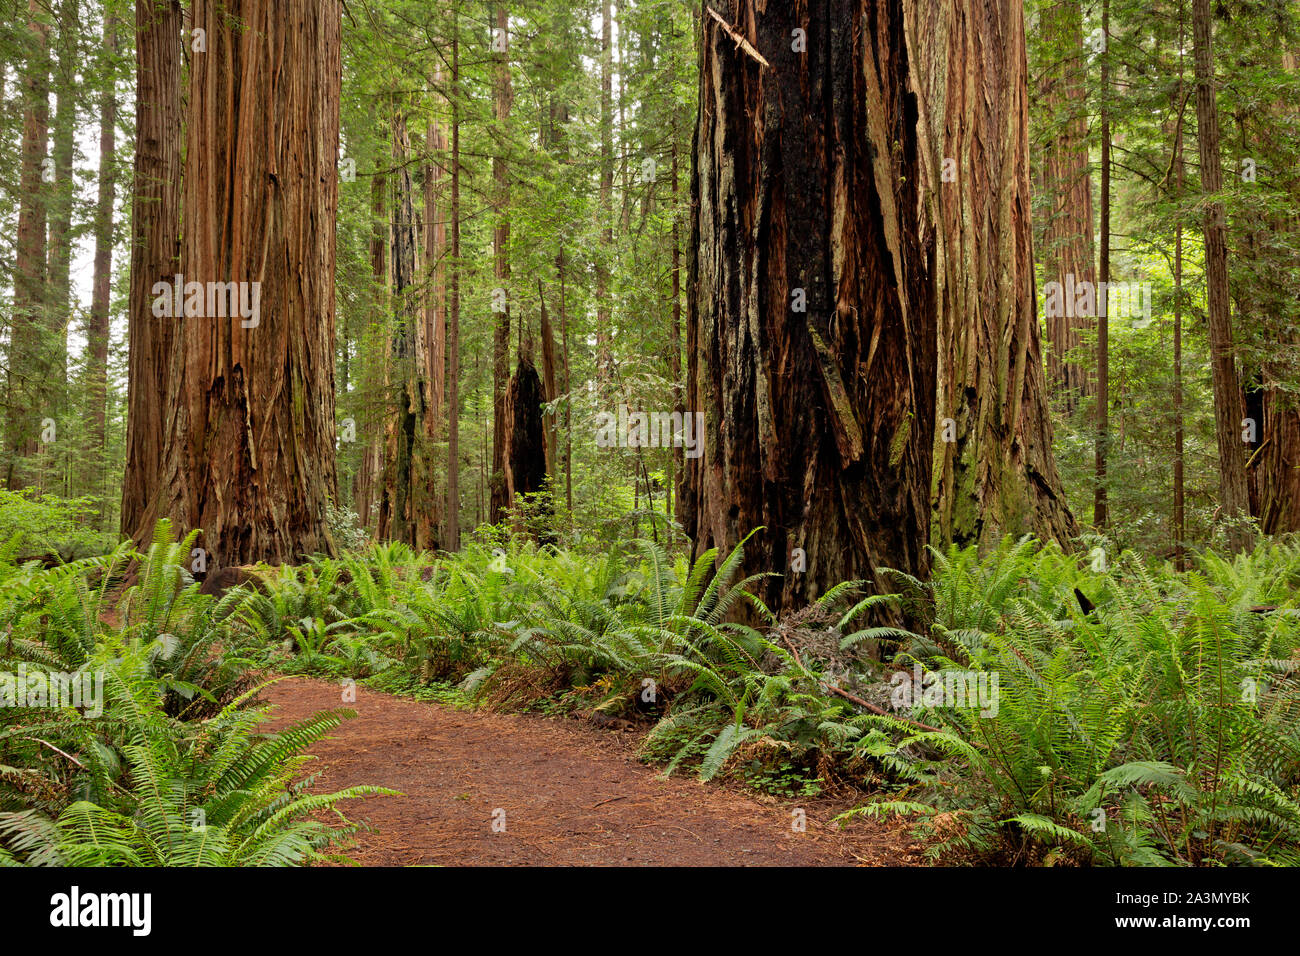 CA03630-00...CALIFORNIA - Loop trail through the redwood trees through Stout Grove in the Jedediah Smith Redwoods State Park. Stock Photo